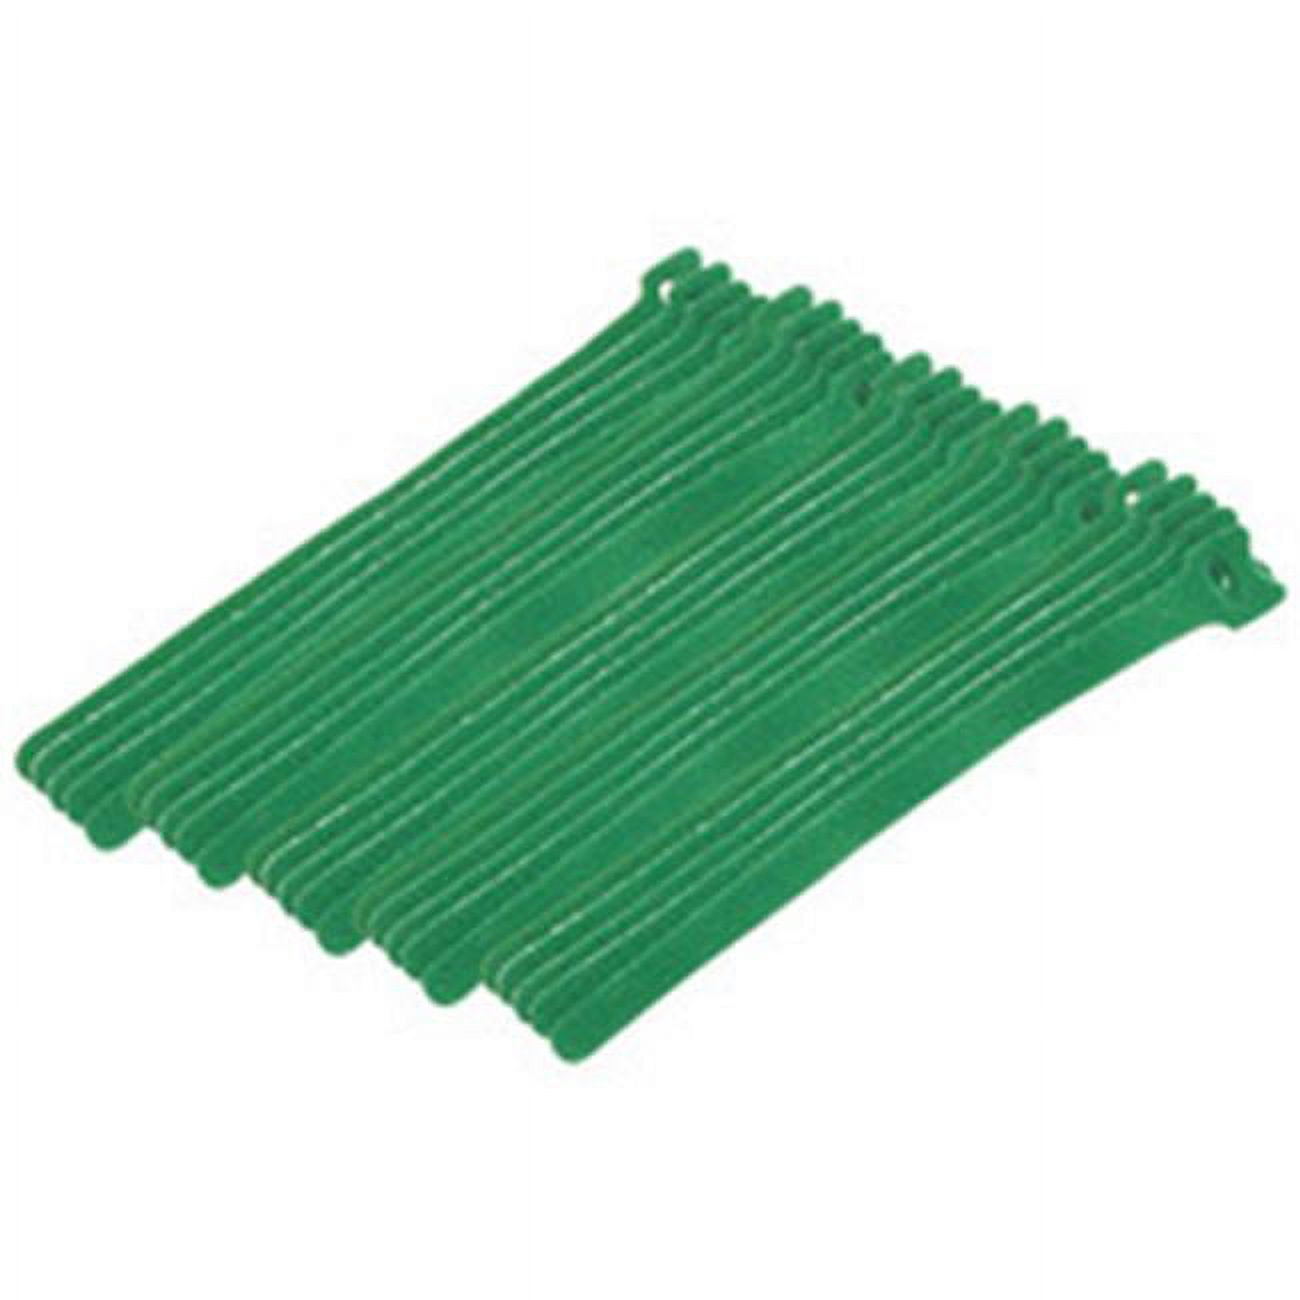 Picture of CableWholesale 30CT-05180 0.50 x 8 in. Green Hook & Loop Cable Strap with Eye - Pack of 25